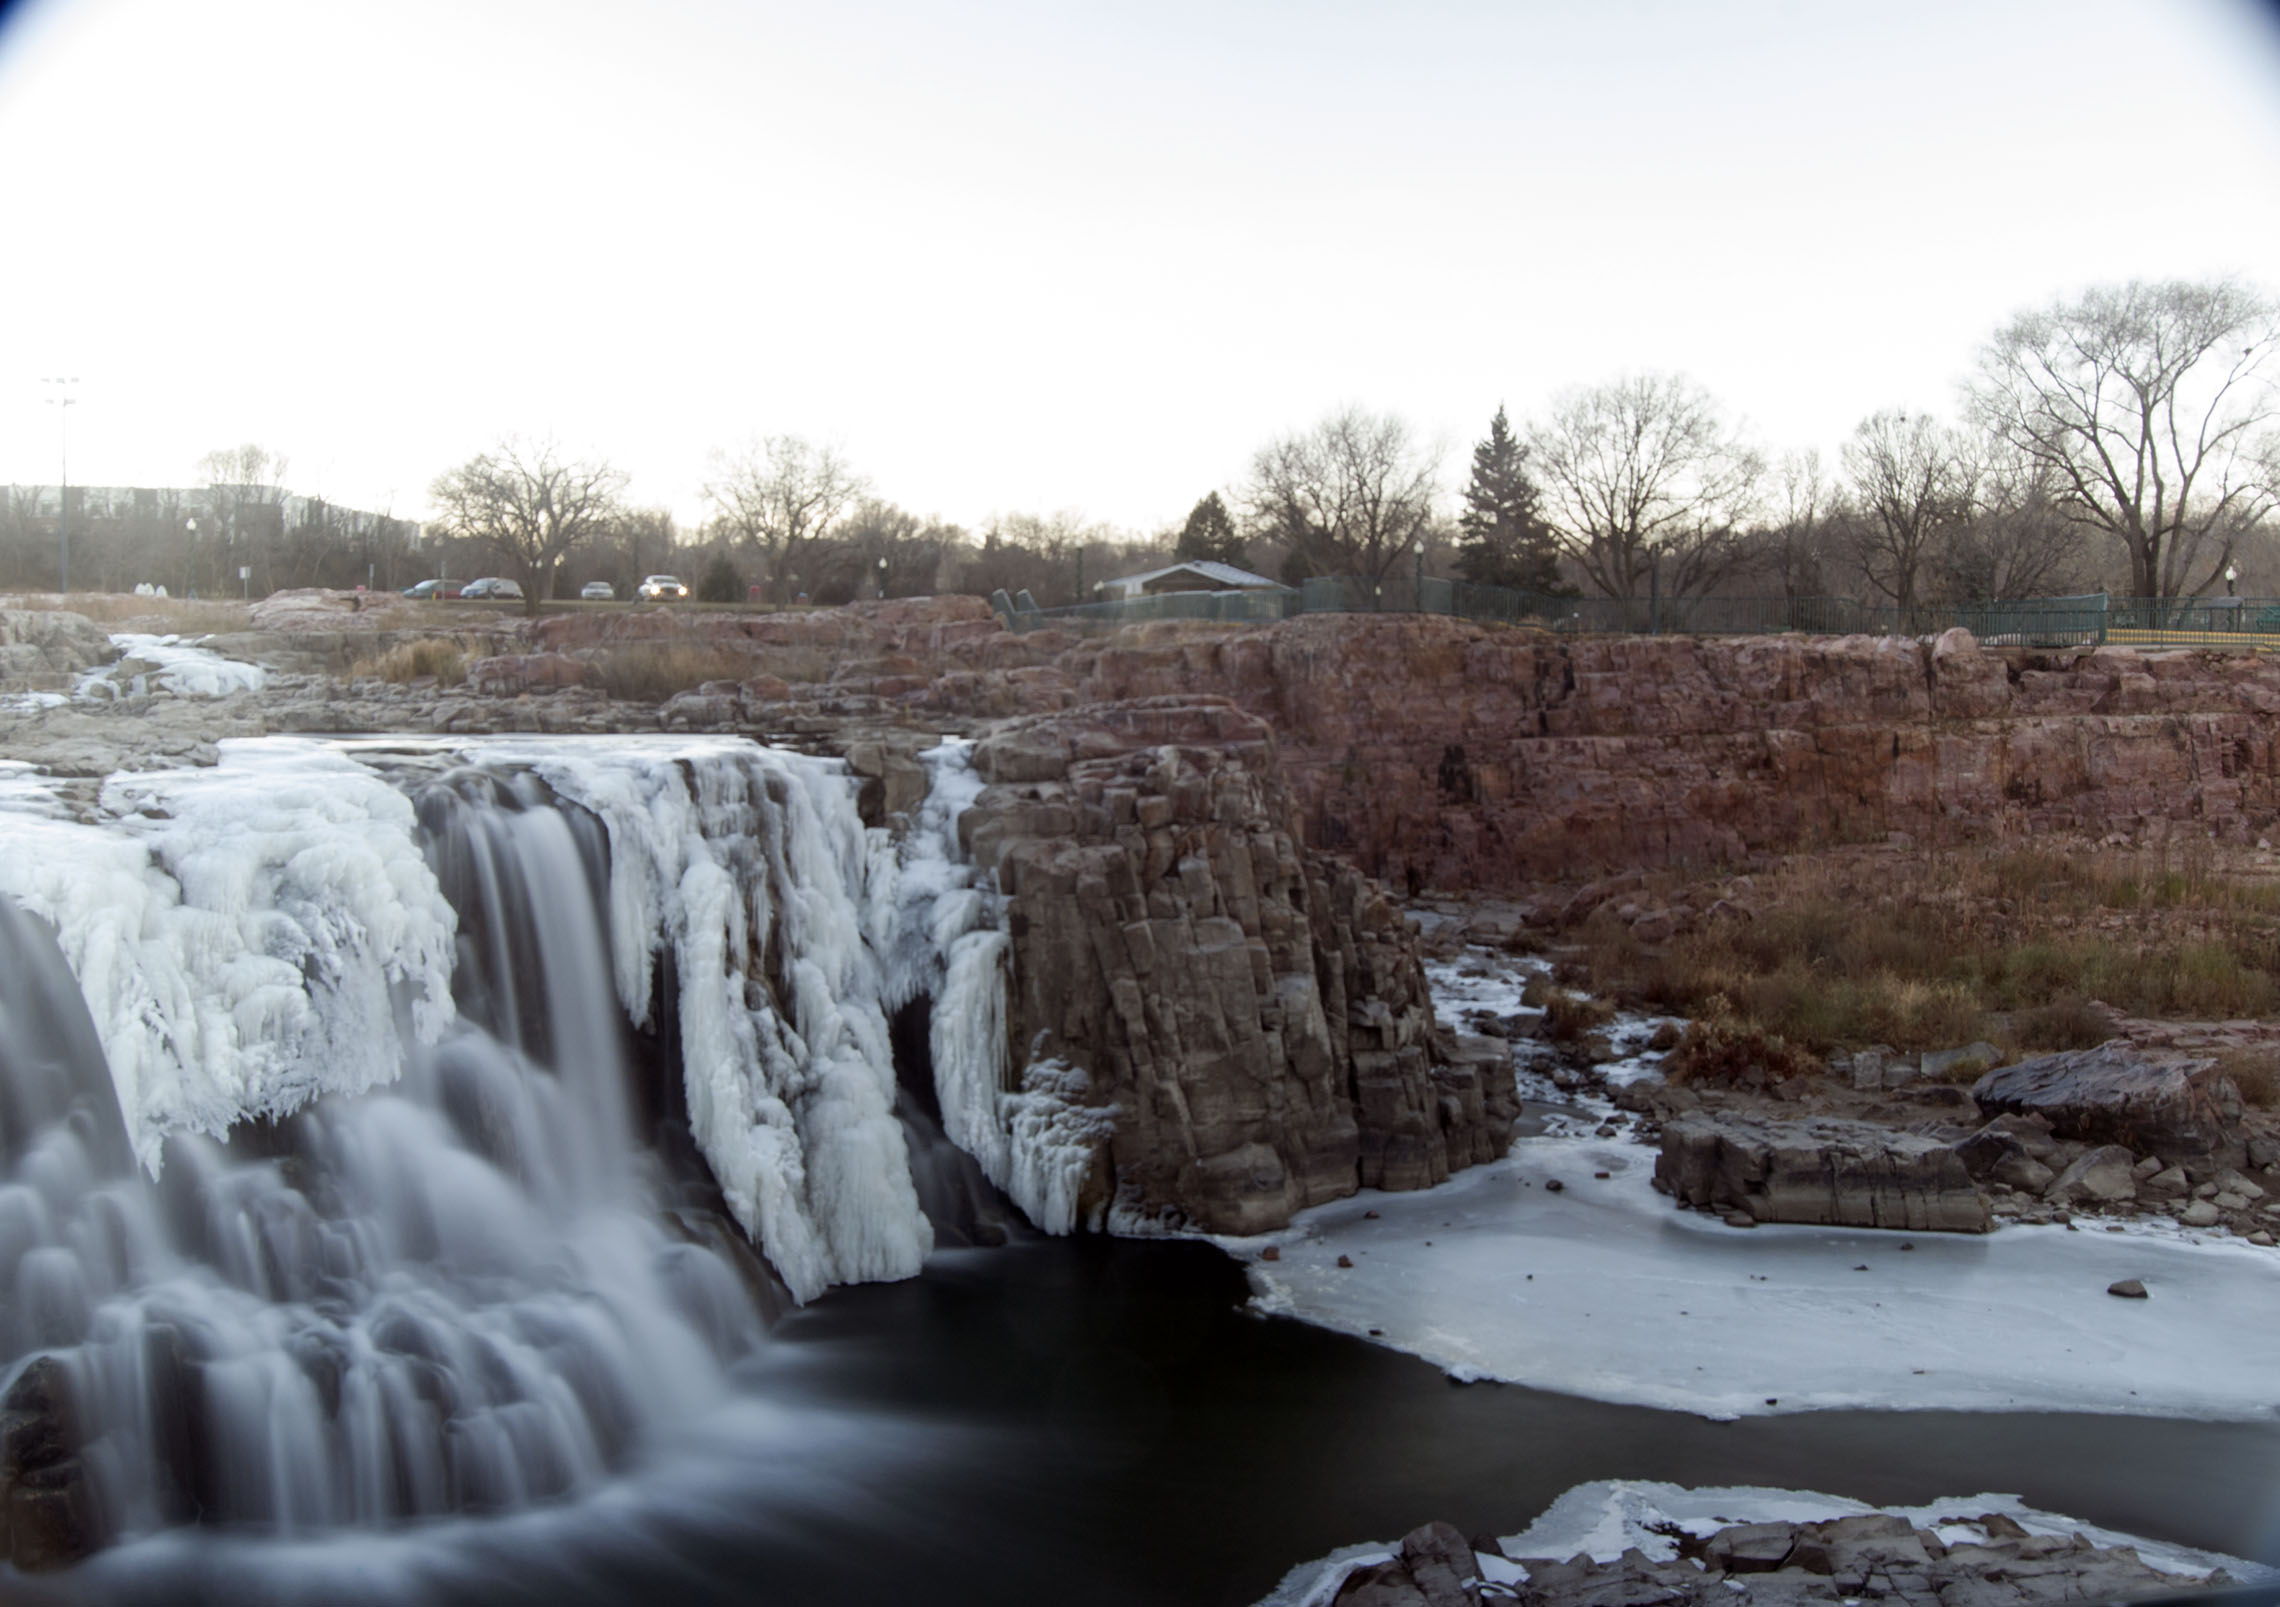 Sioux Falls Waterfall with ice formations and running water 01